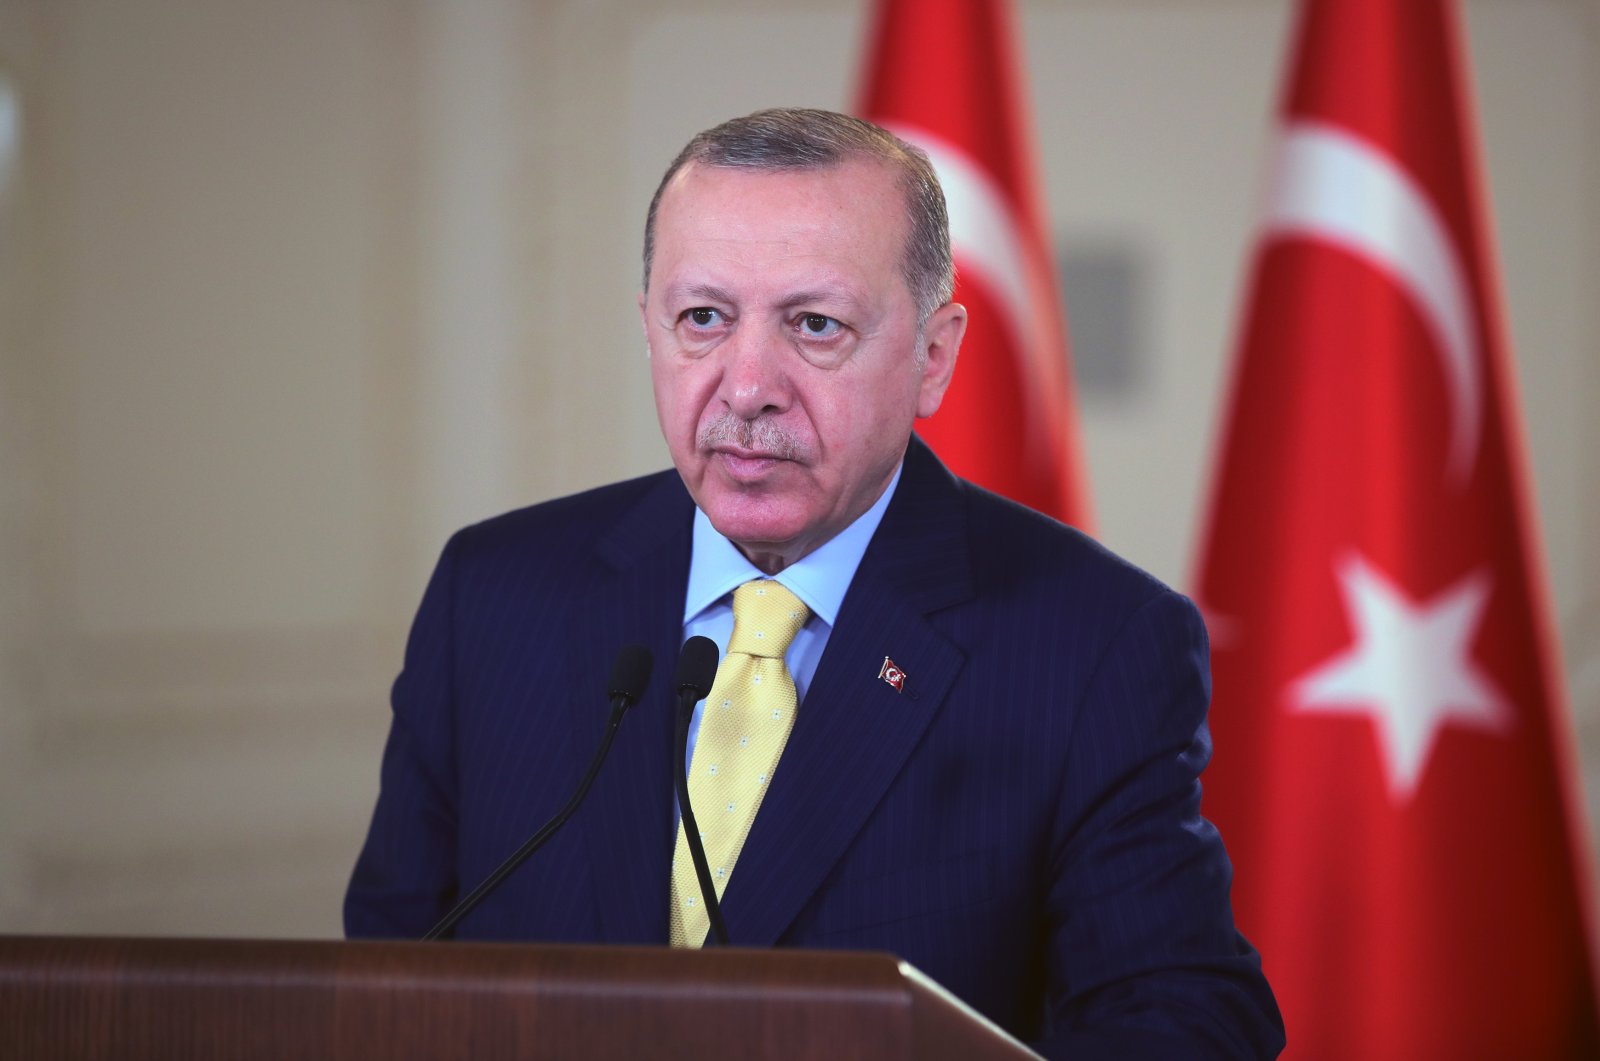 President Recep Tayyip Erdoğan attends a videoconference at the Vahdettin Mansion presidential facility in Istanbul, Turkey, May 22, 2021. (AA Photo)